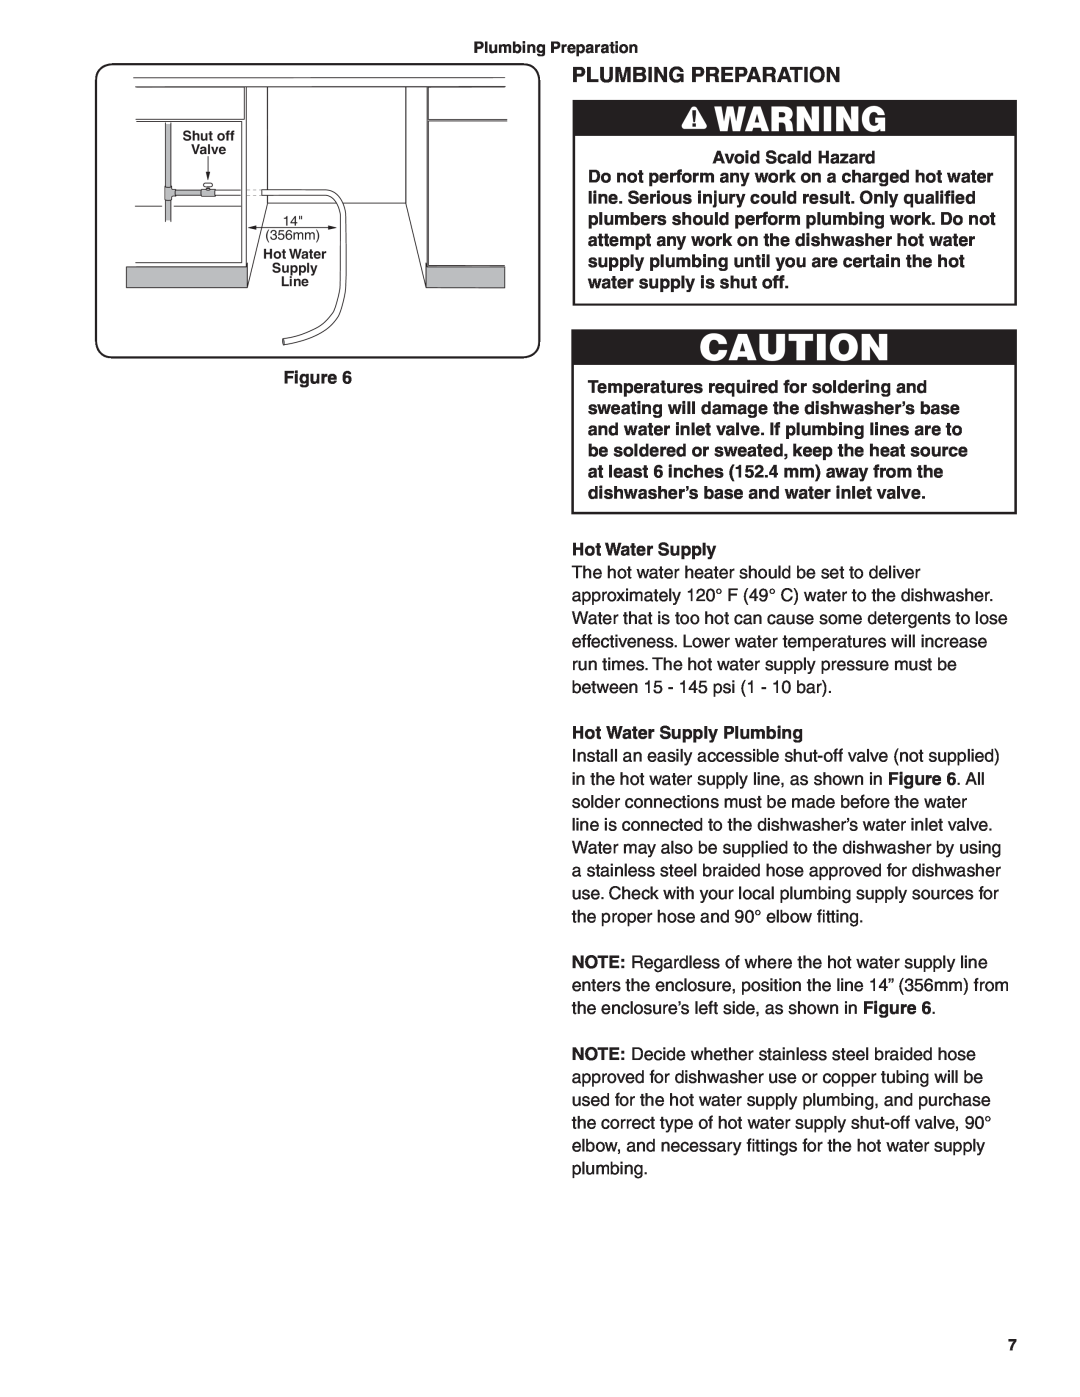 Bosch Appliances BSH Dishwasher important safety instructions Plumbing Preparation 